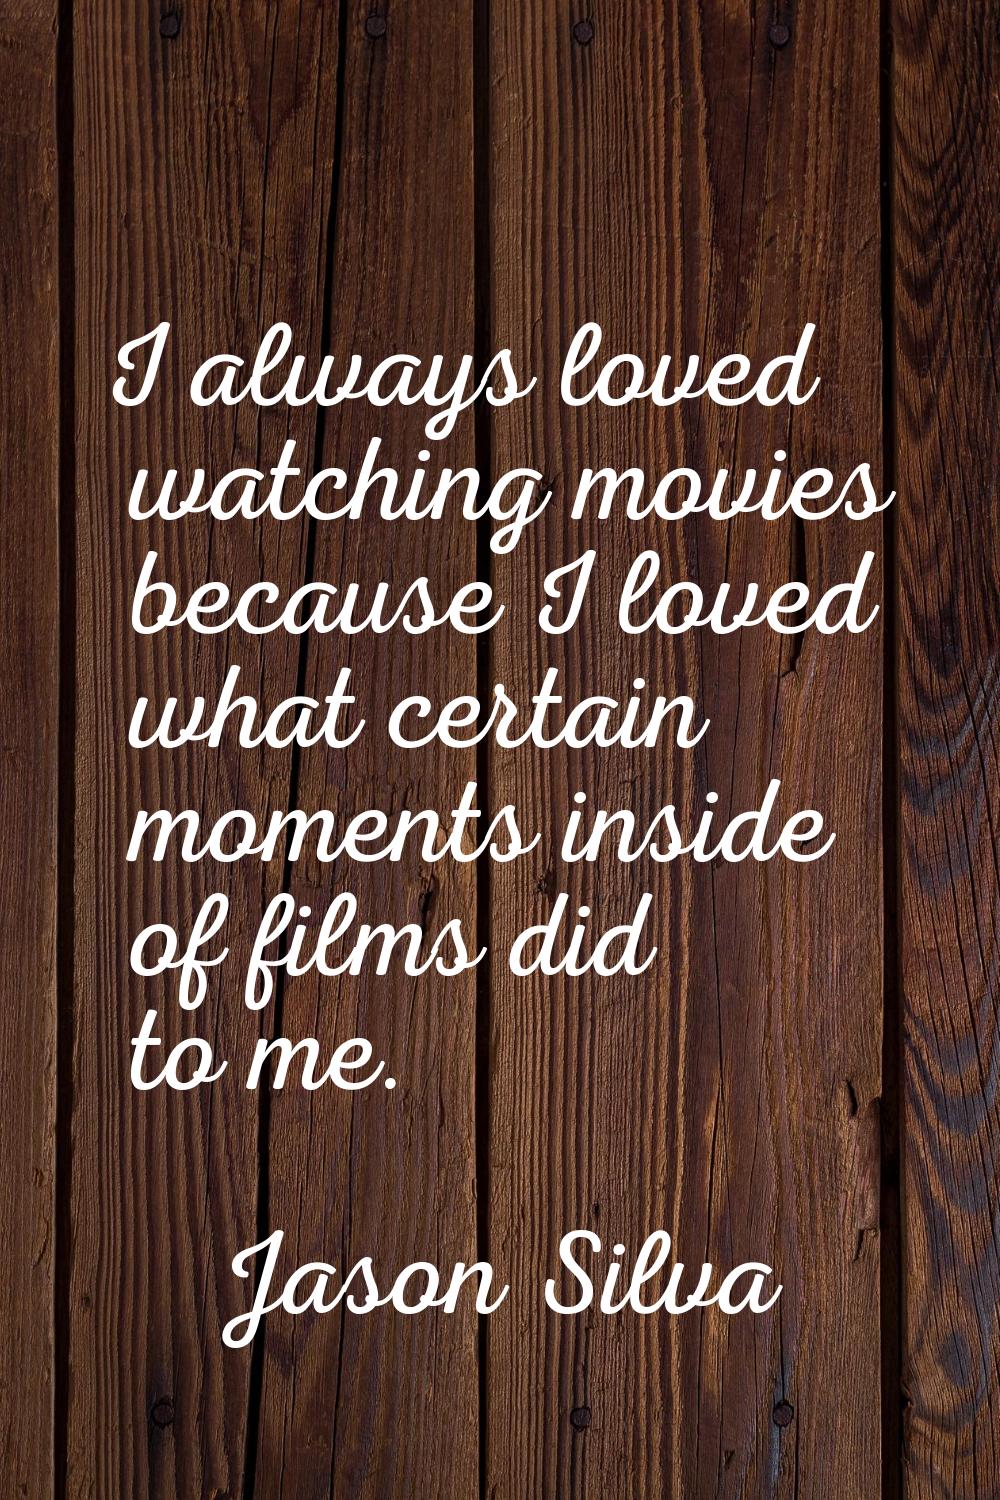 I always loved watching movies because I loved what certain moments inside of films did to me.